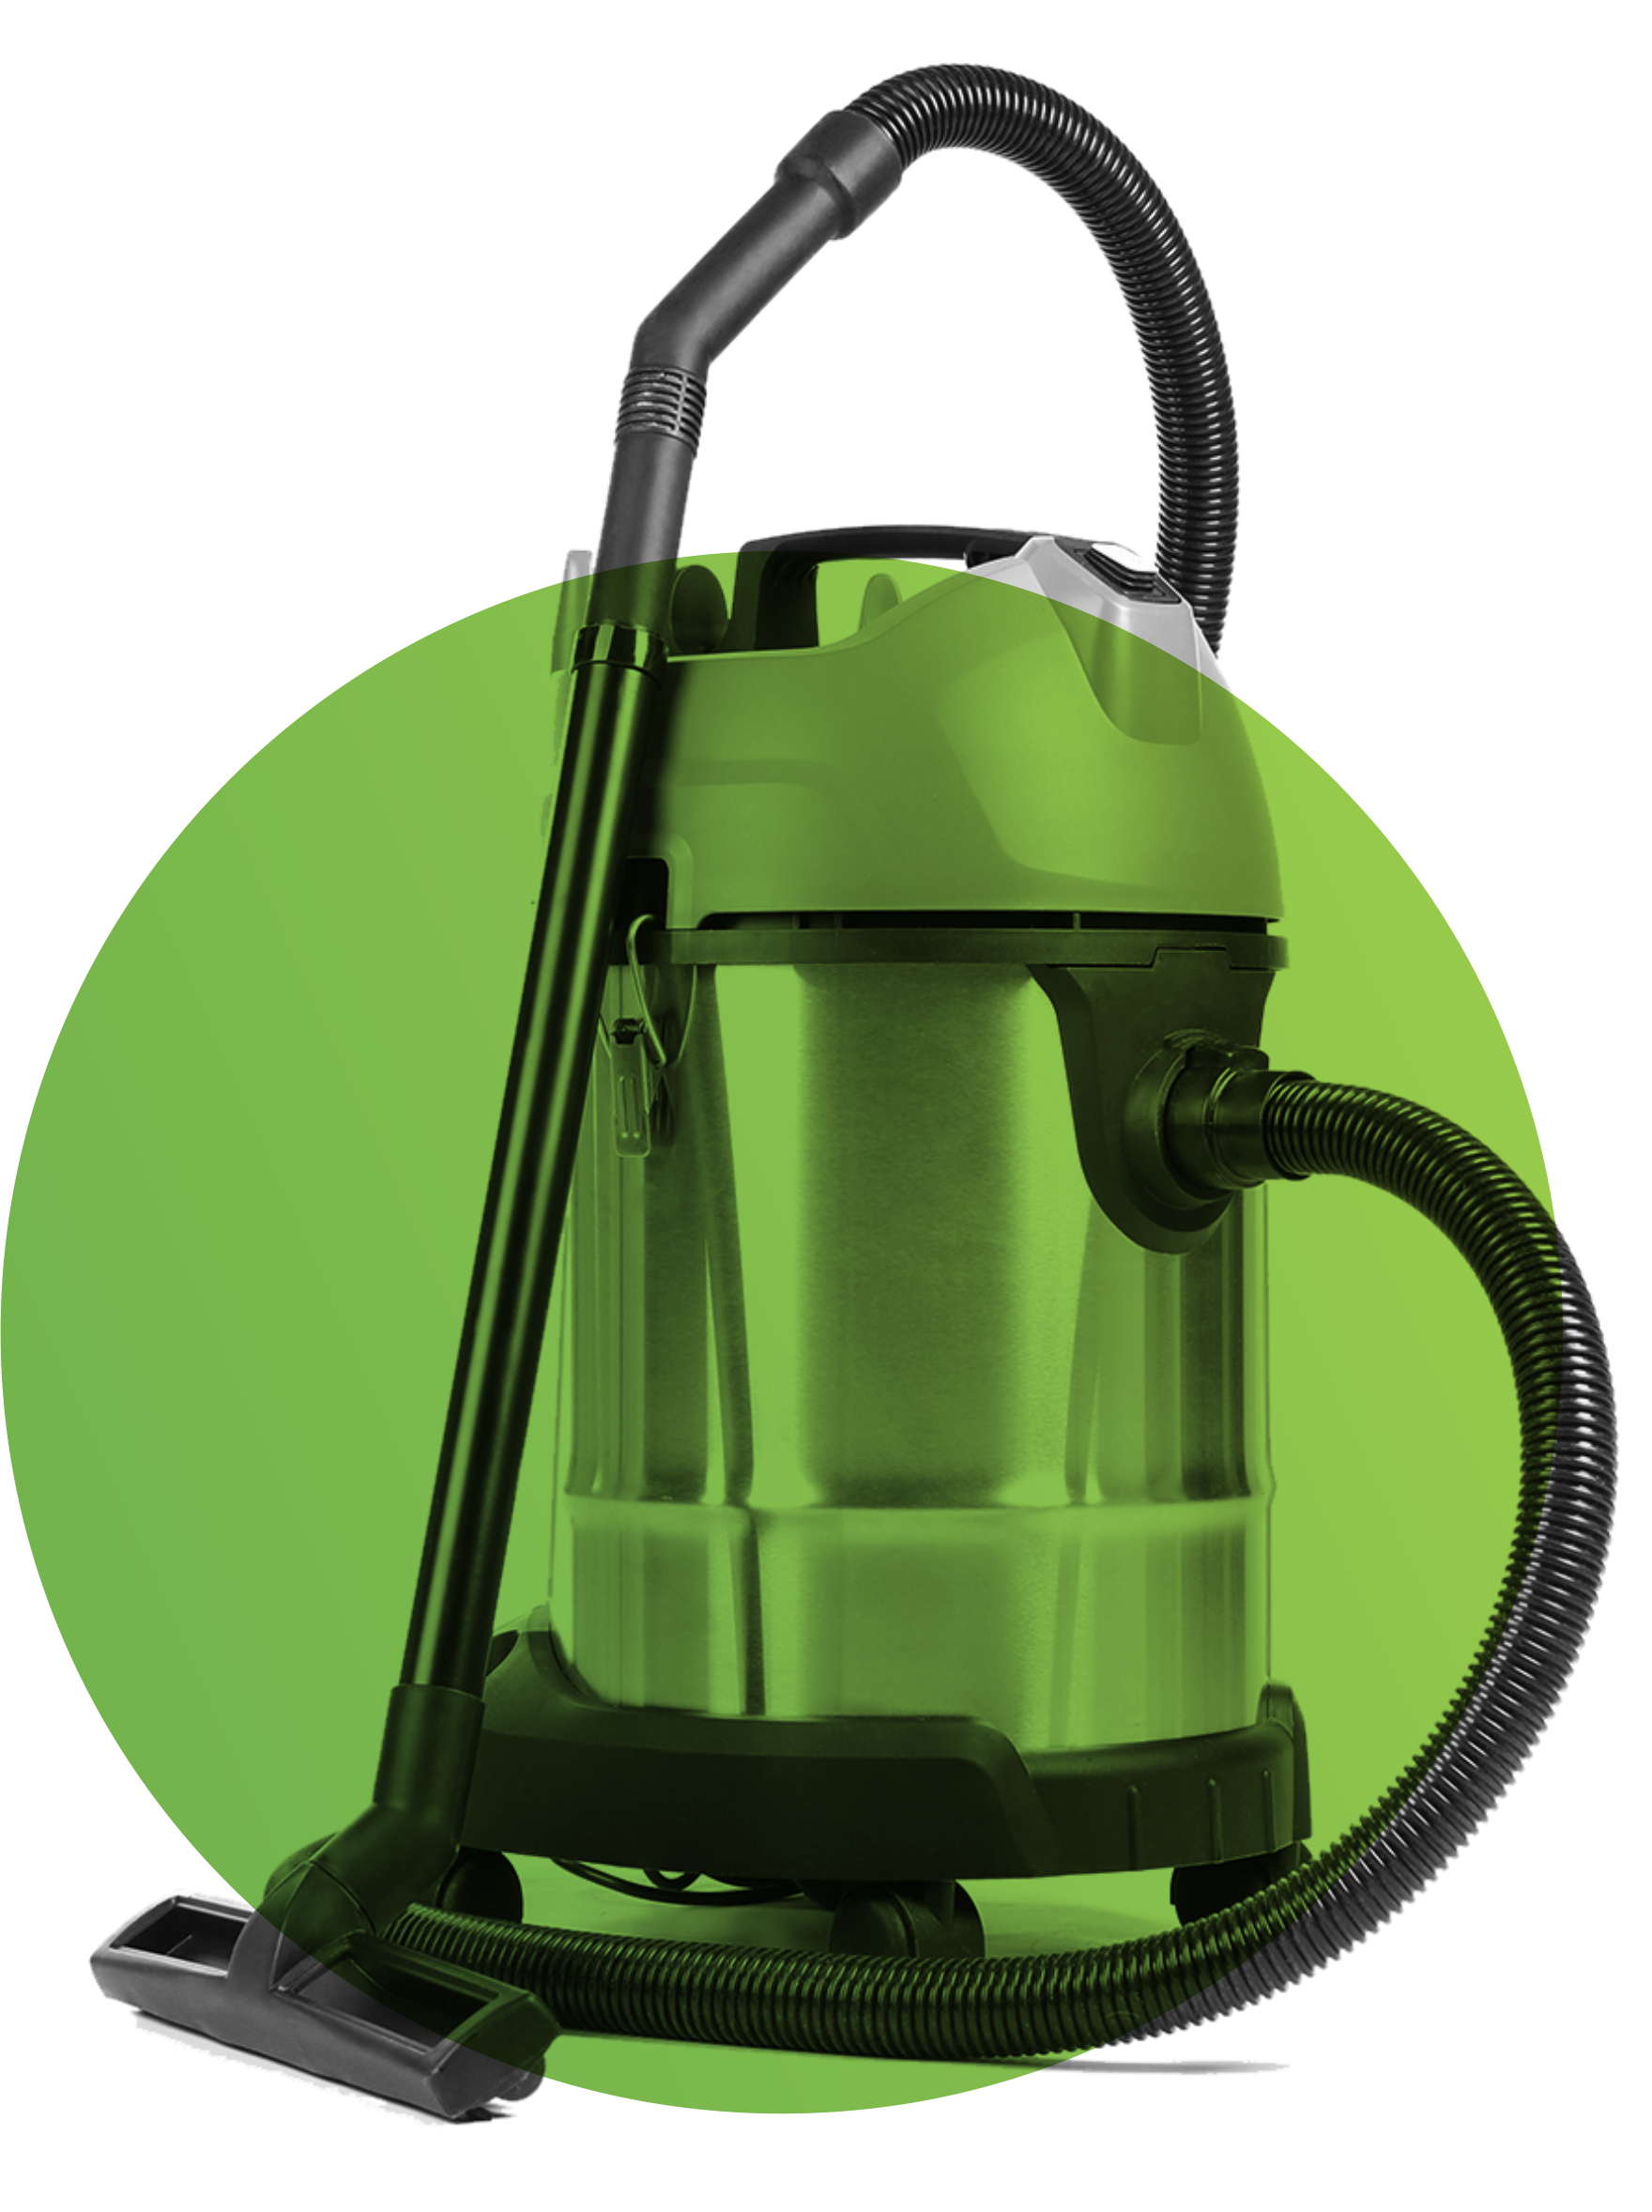 Image of Commercial Vacume Cleaner 